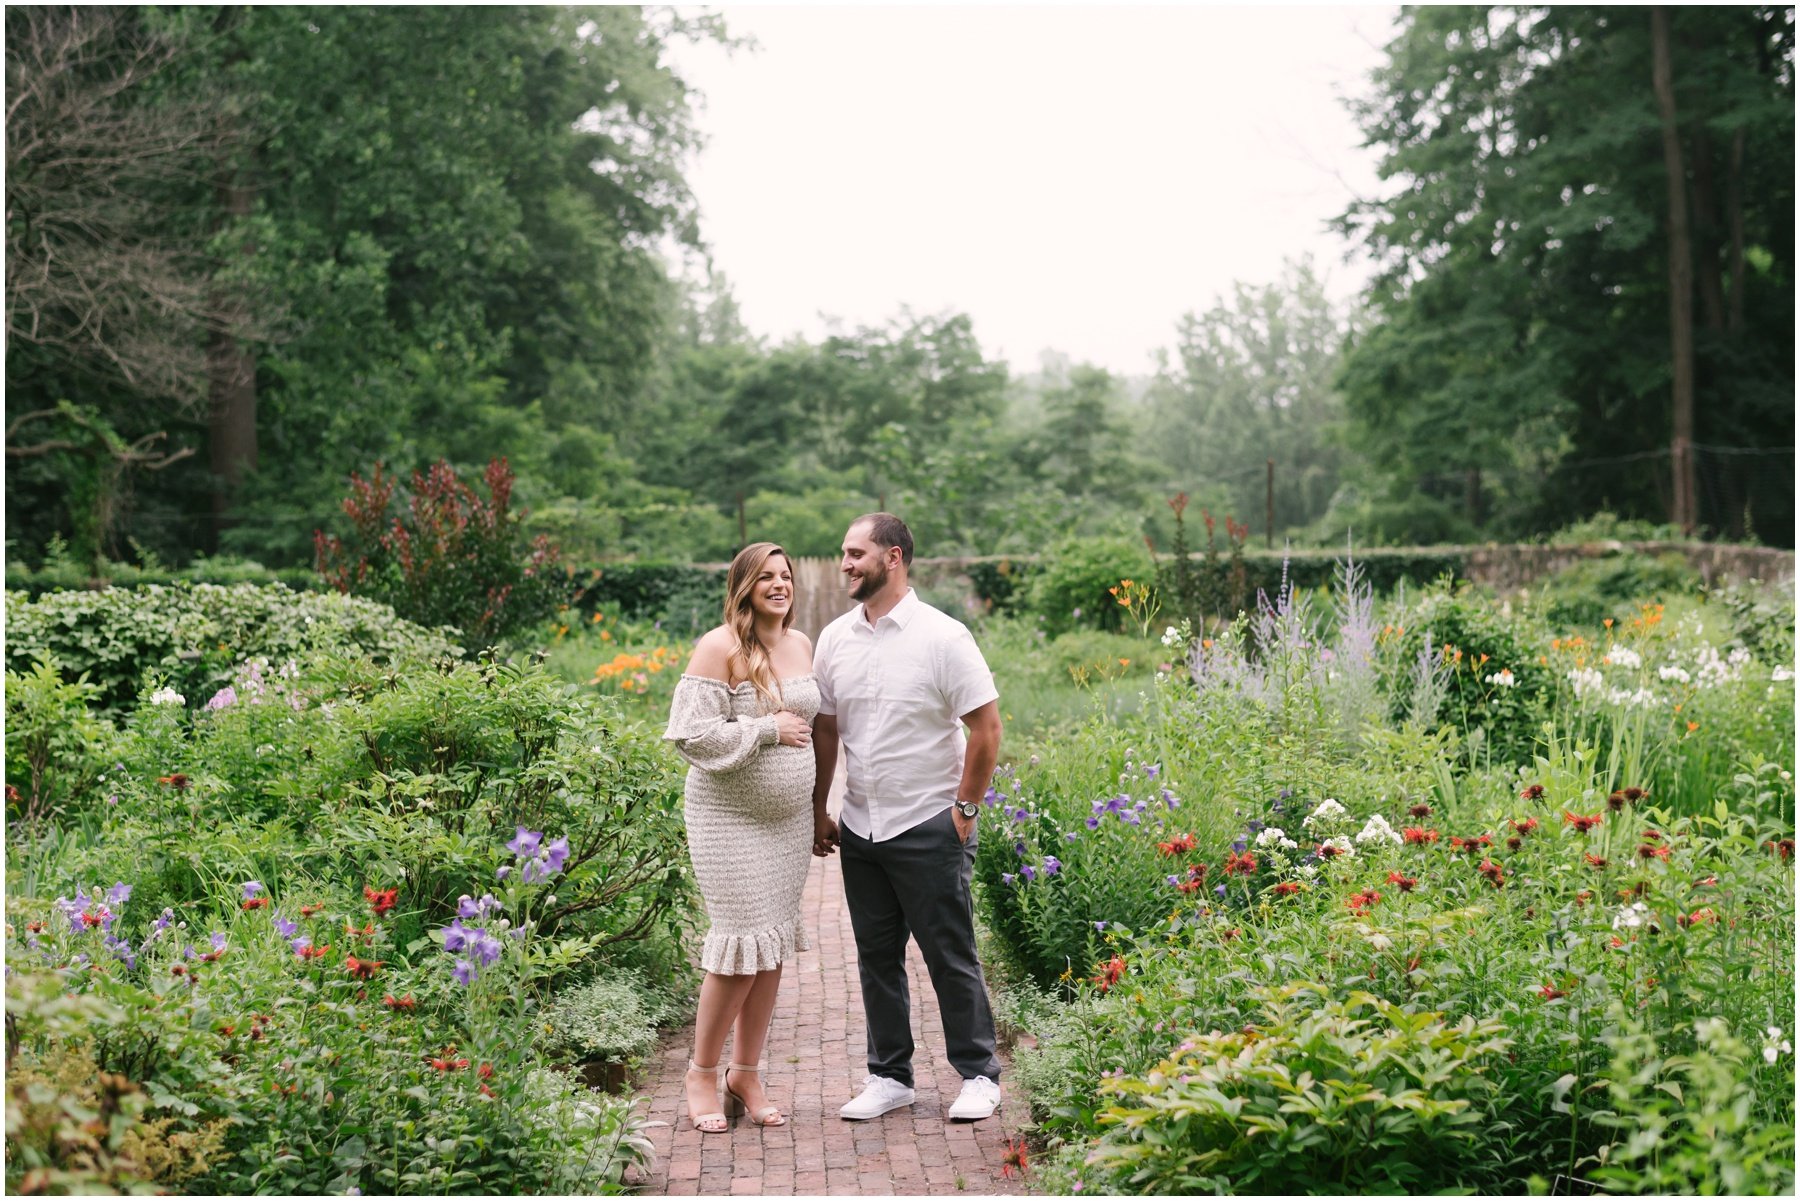 Couple laughing in garden during maternity session | NKB Photo